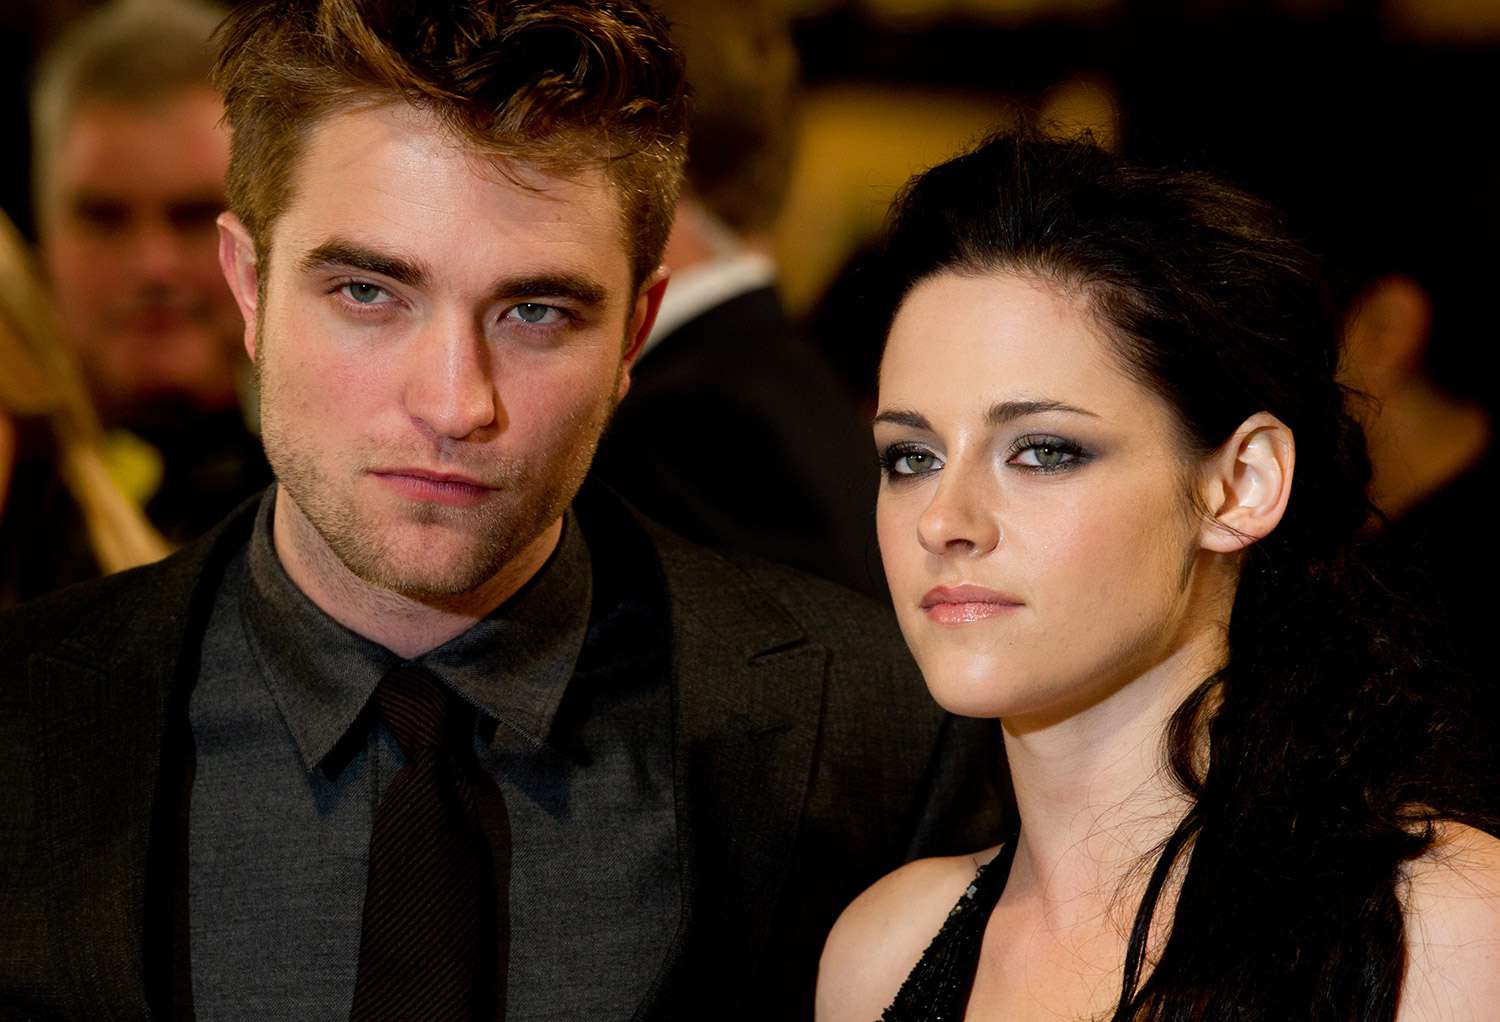 Rob and kristen latest news